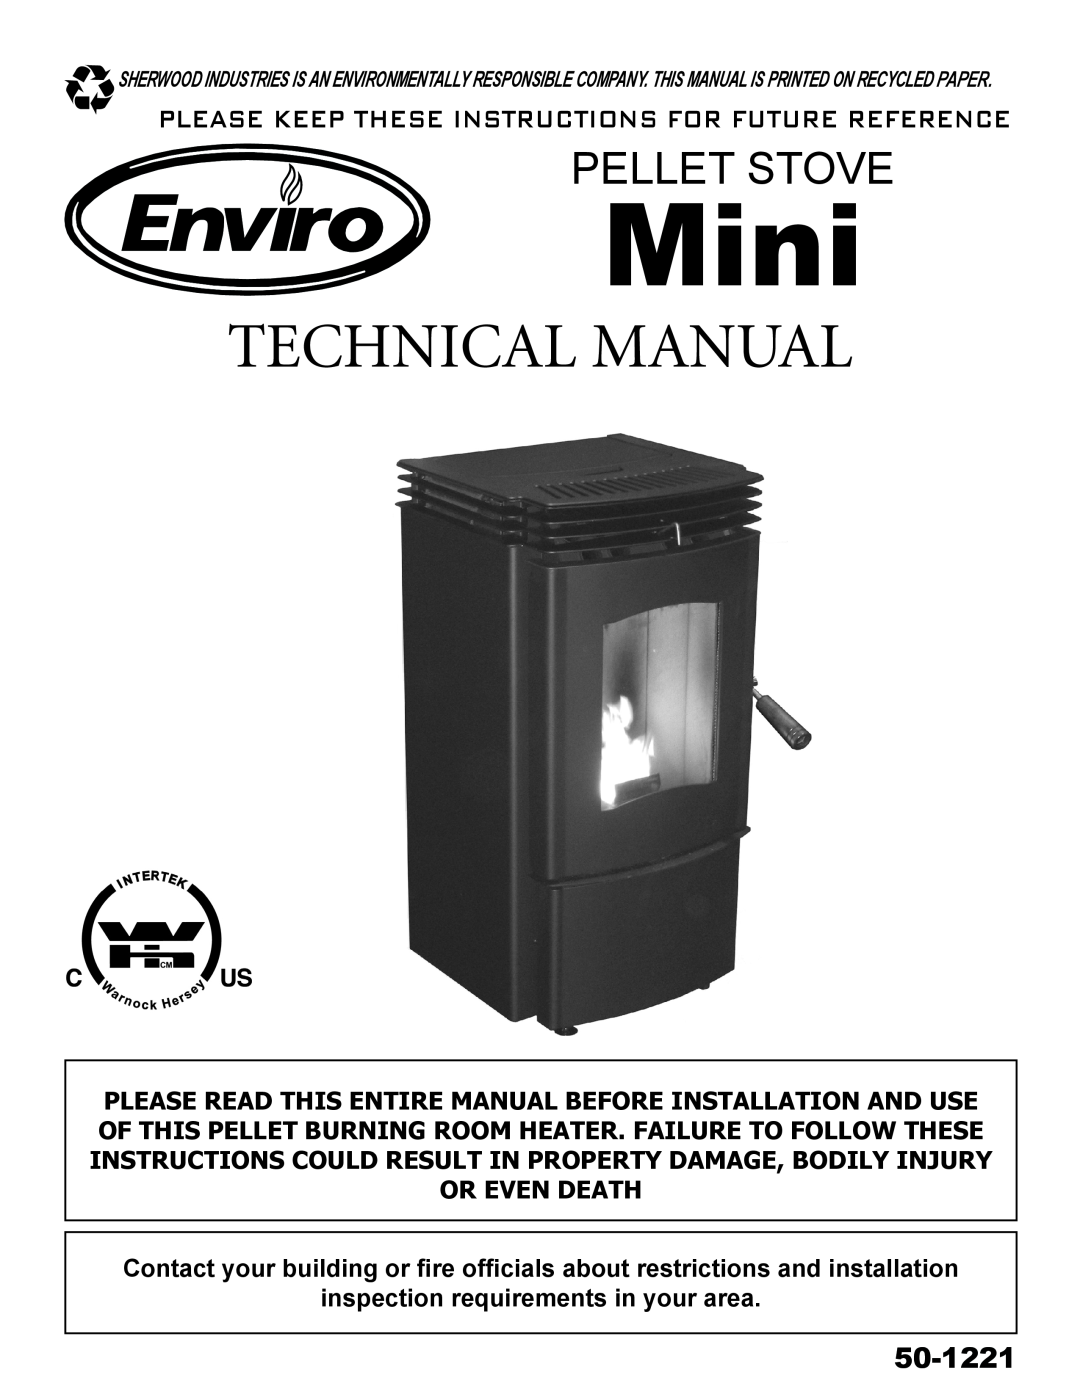 Mega Catch Mini technical manual 50-1221, Technical Manual, Pellet Stove, inspection requirements in your area 